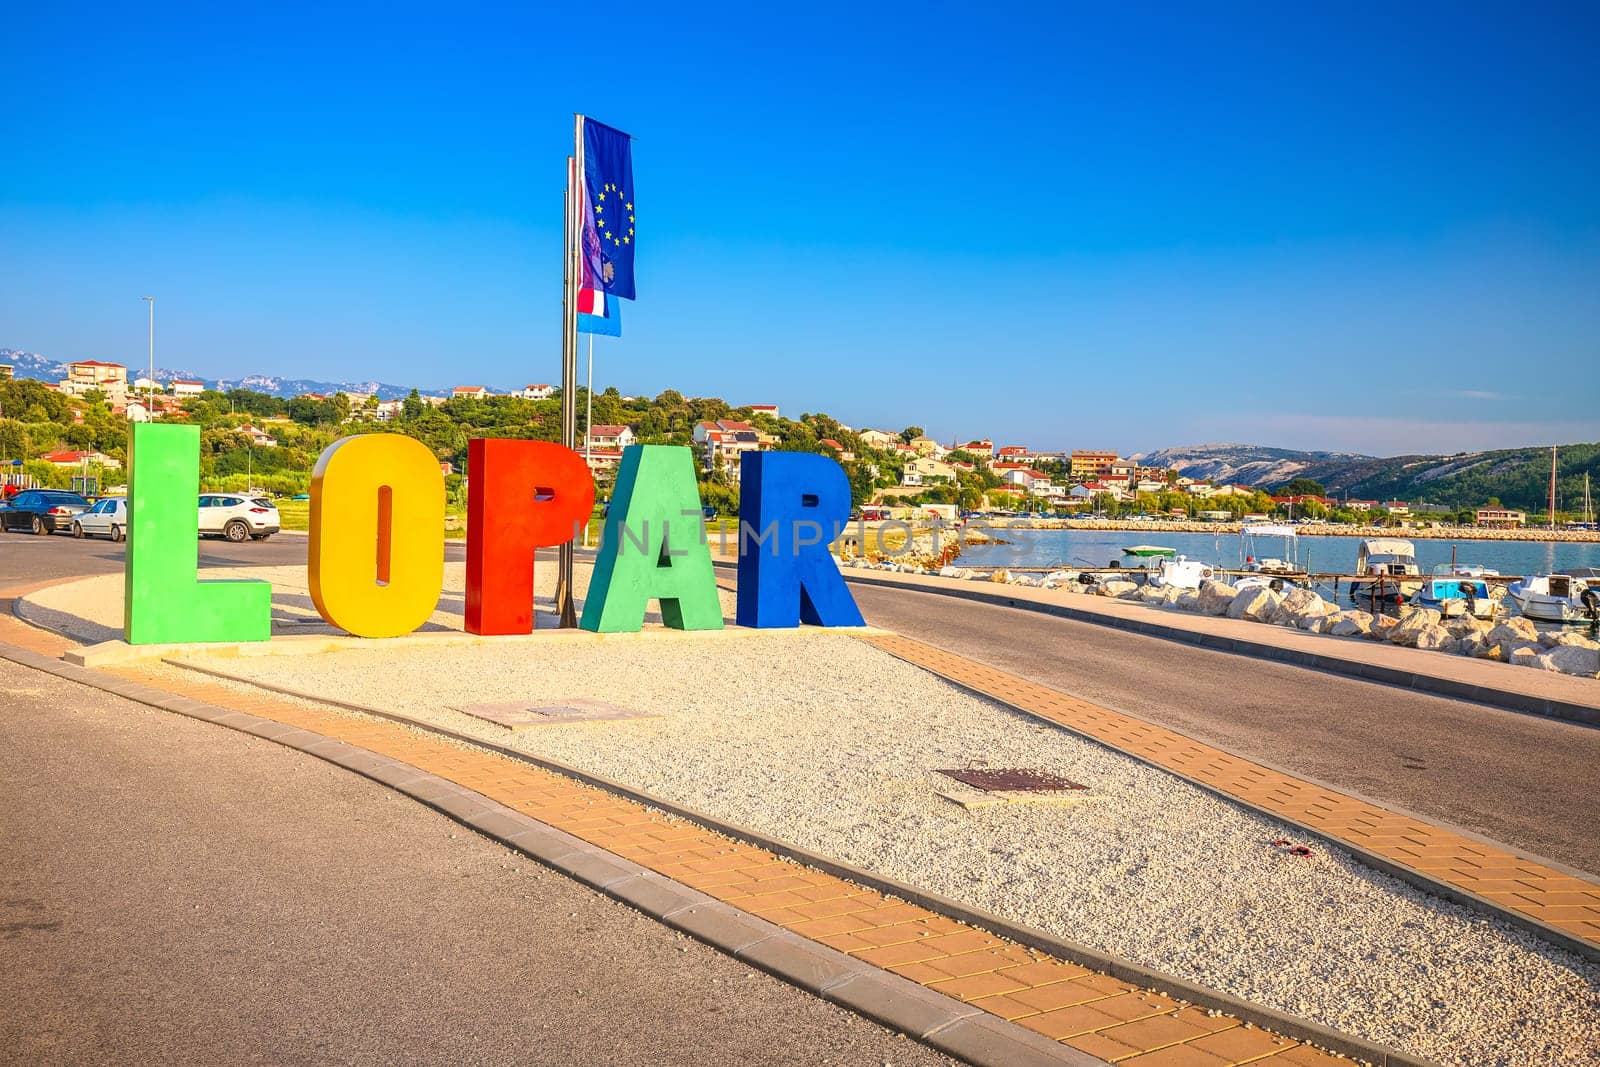 Town of Lopar on Rab island sign and beachfront view, archipelago of Croatia